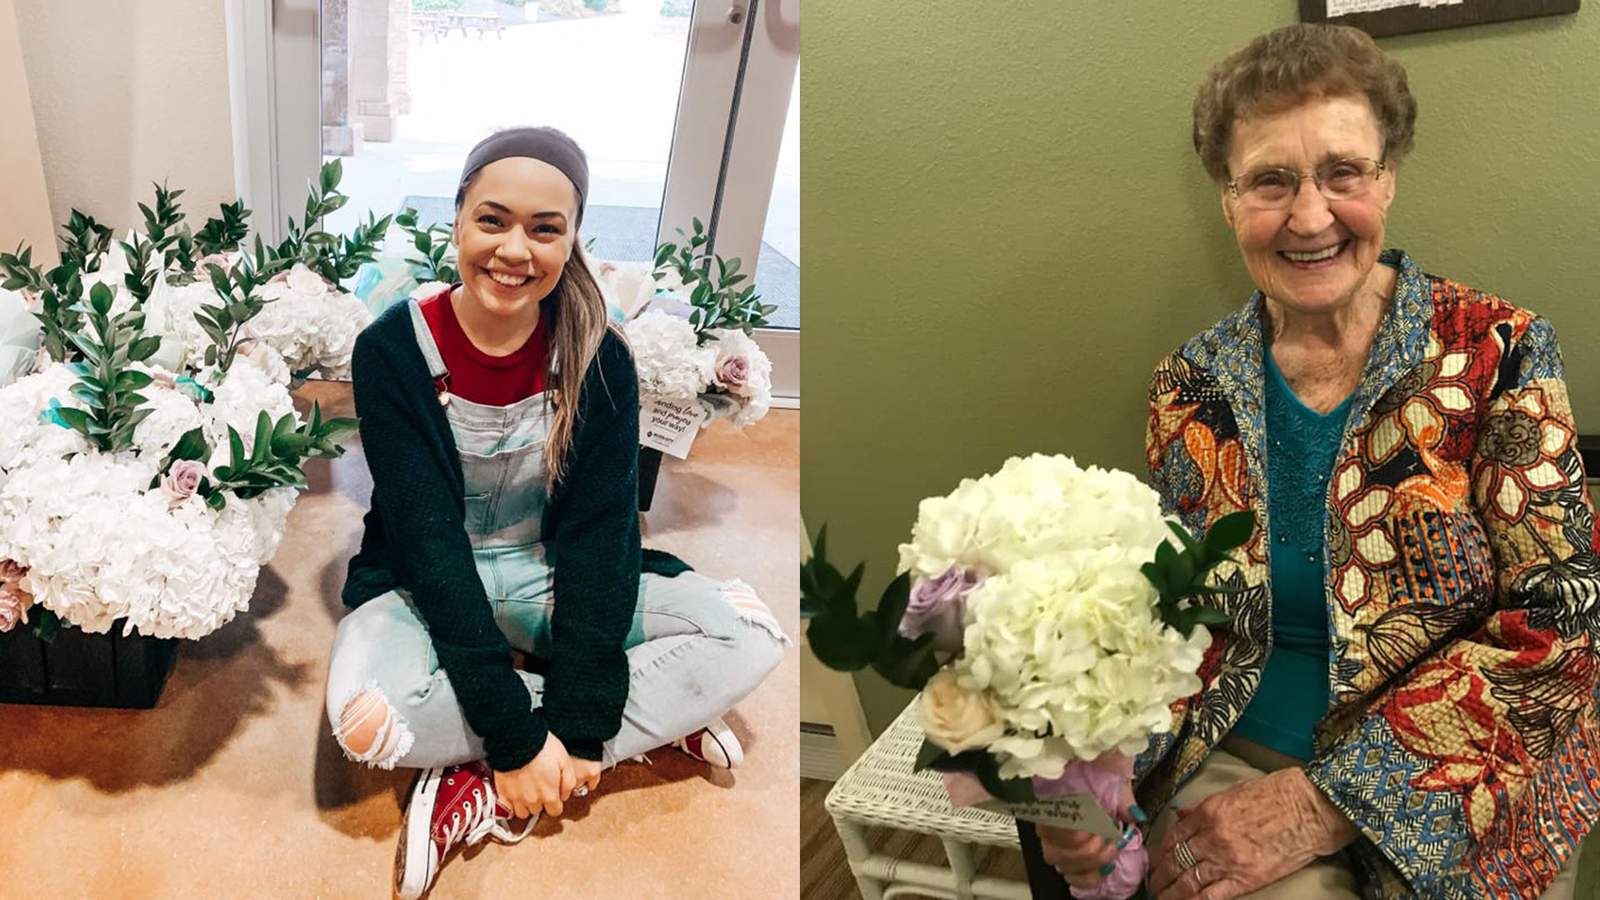 Couple donates flowers to assisted living homes after their wedding was canceled due to coronavirus